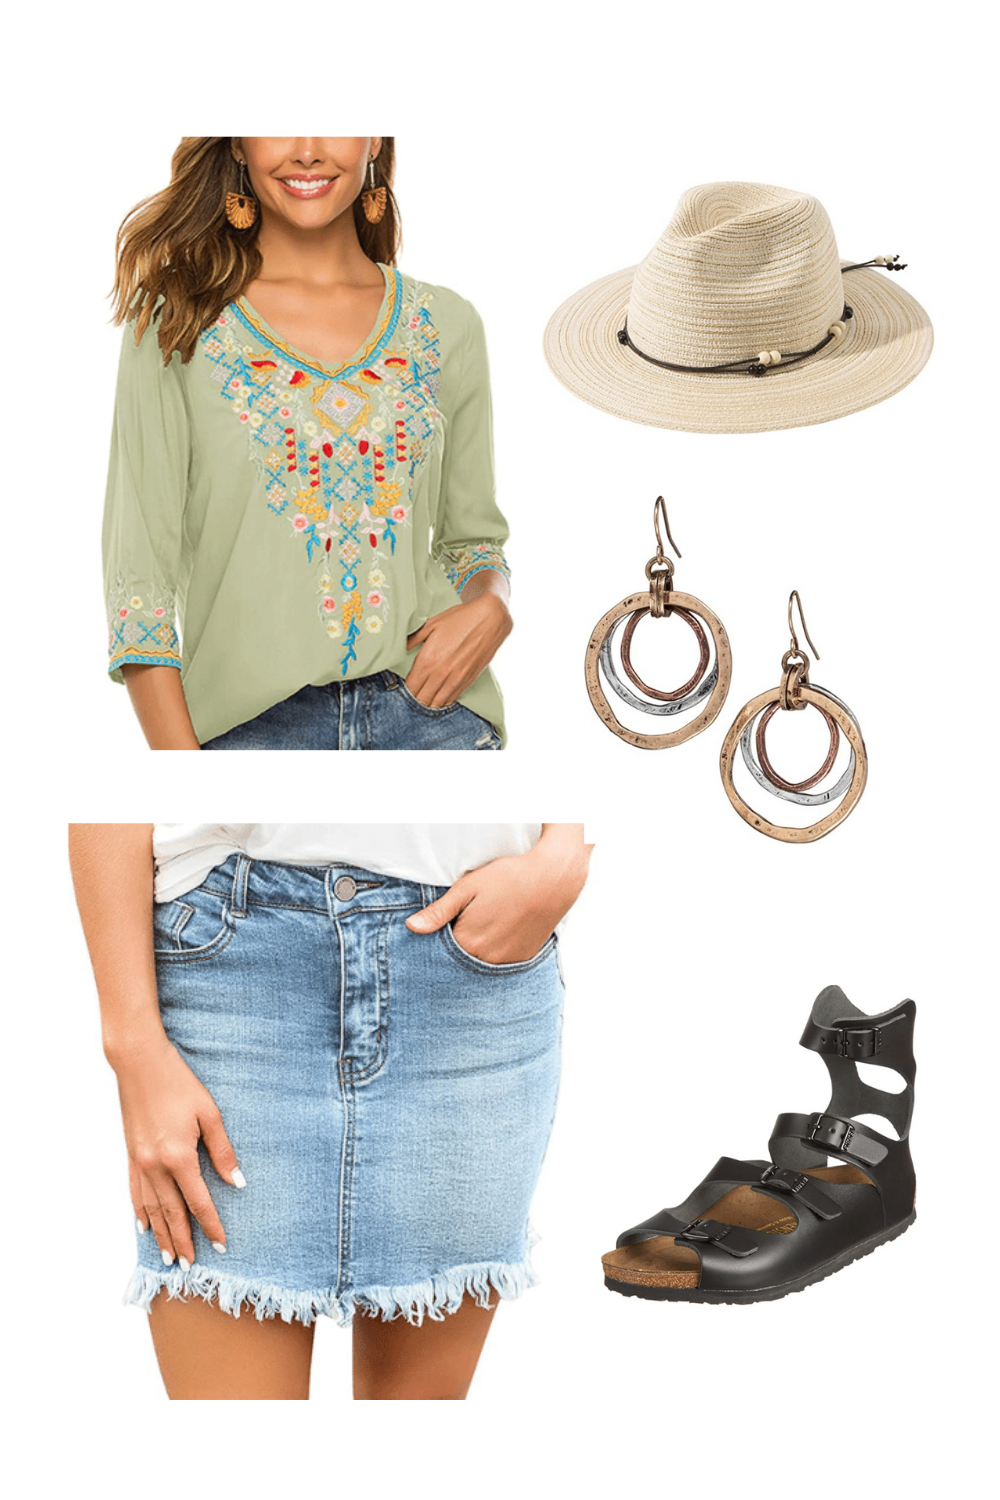 5 Ways To Rock Boho Outfits For Spring